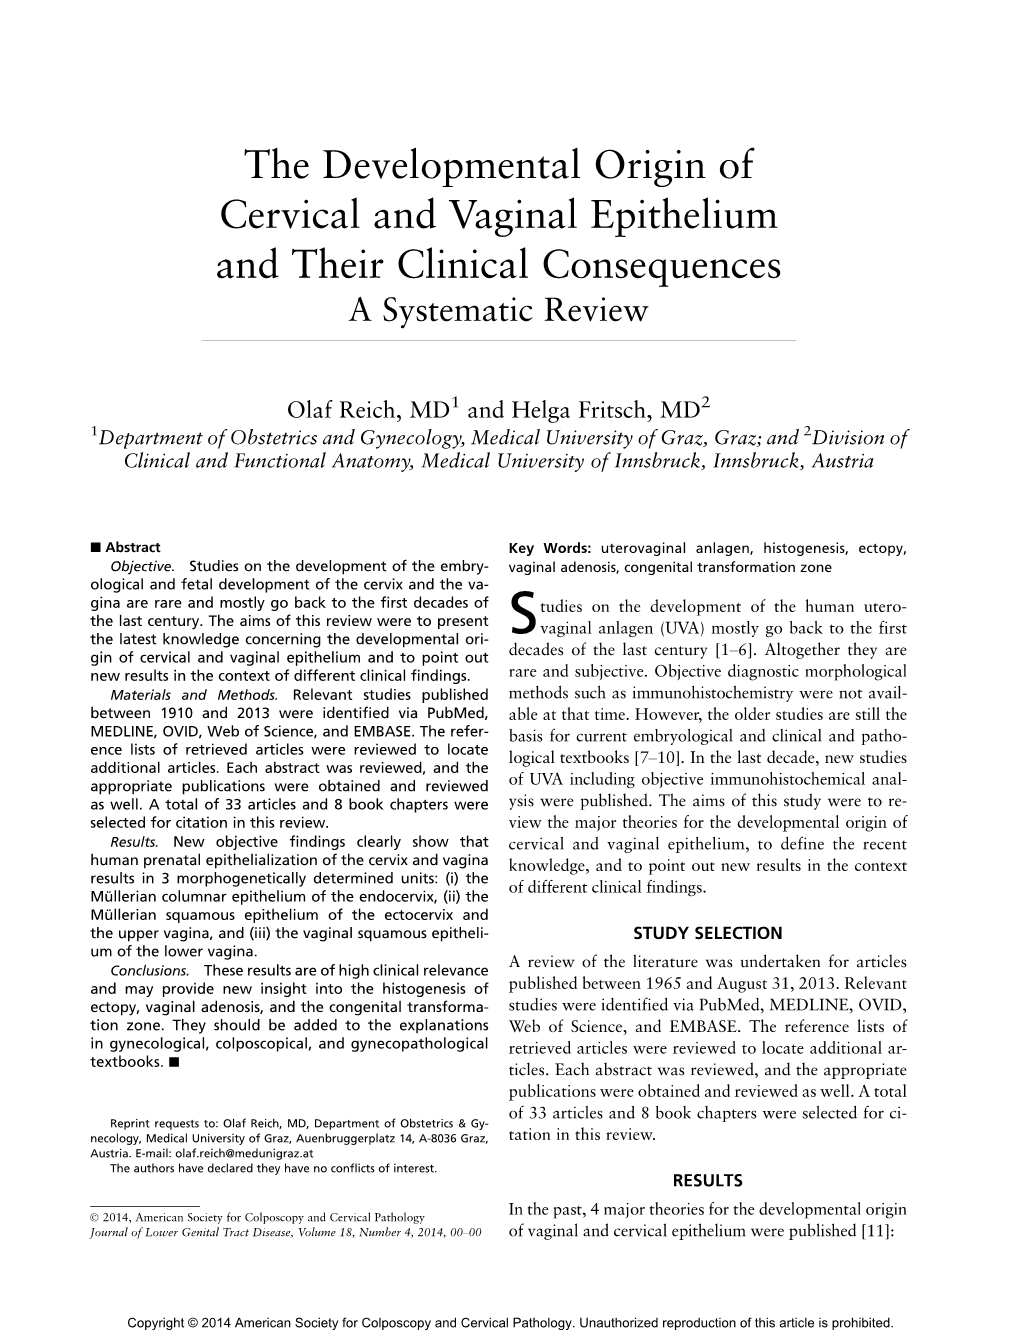 The Developmental Origin of Cervical and Vaginal Epithelium and Their Clinical Consequences a Systematic Review